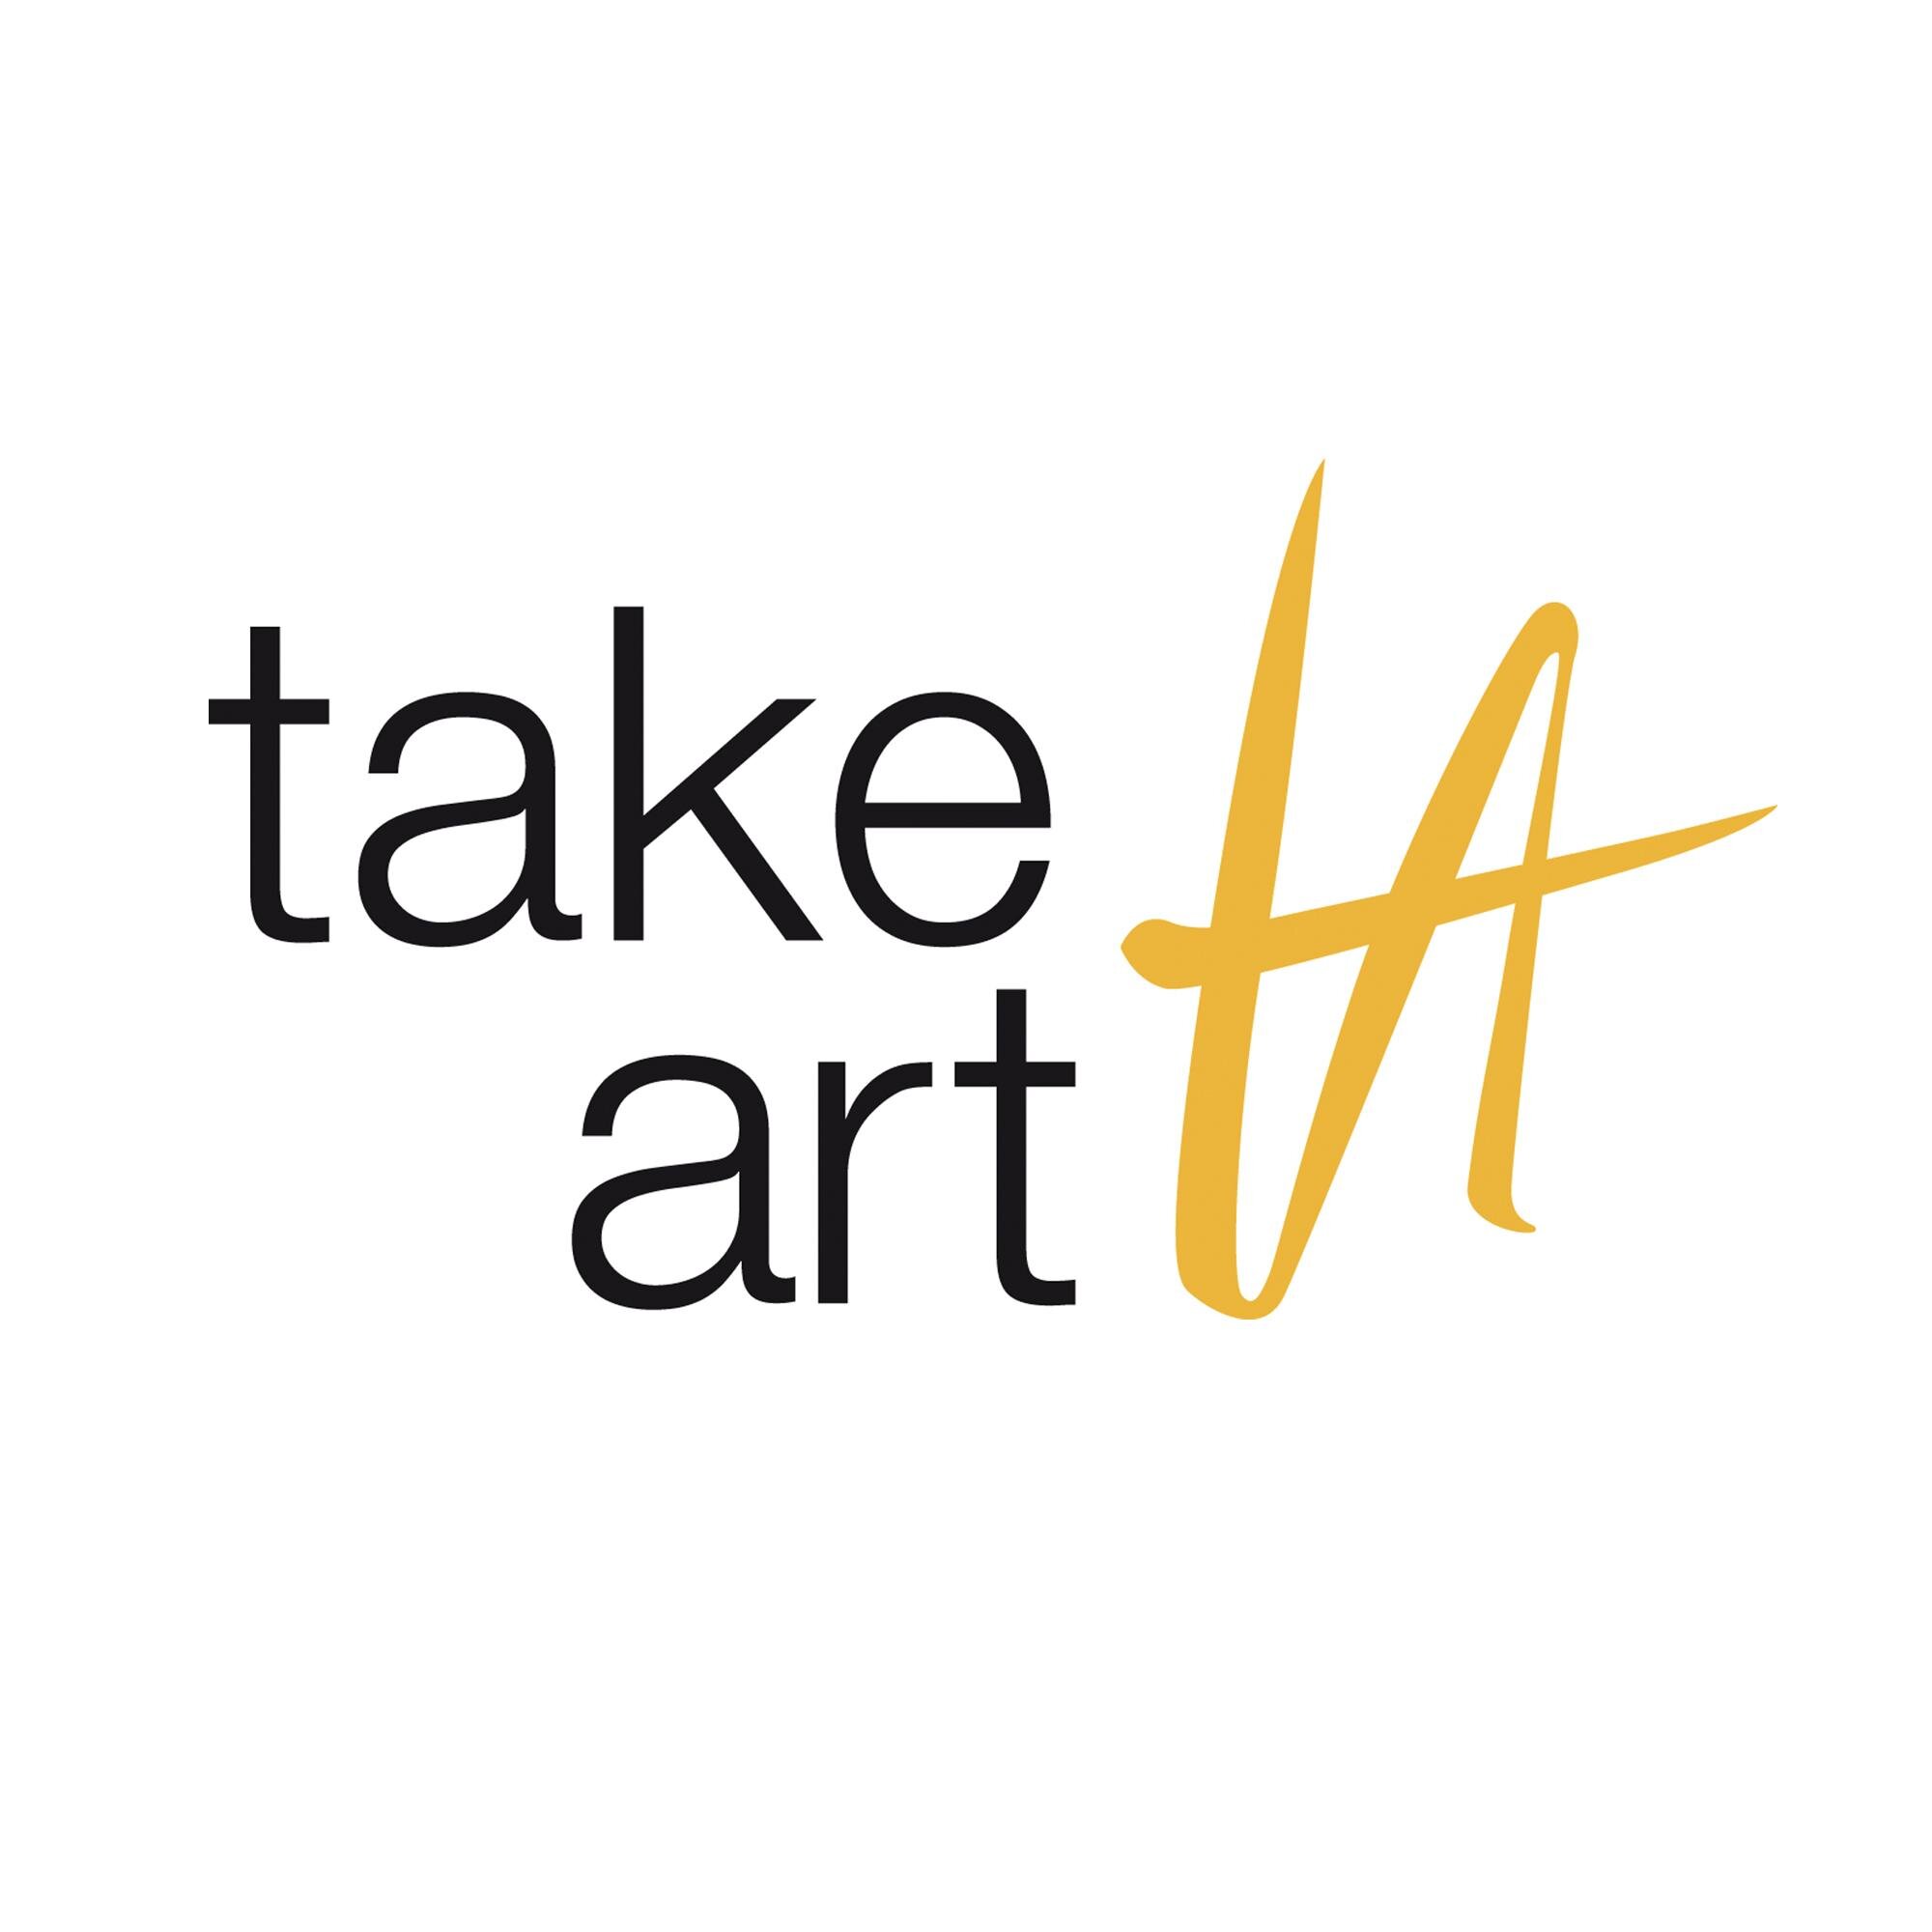 A pioneering Somerset based charity providing access to the arts for people of all ages, backgrounds and abilities. #TakeArt